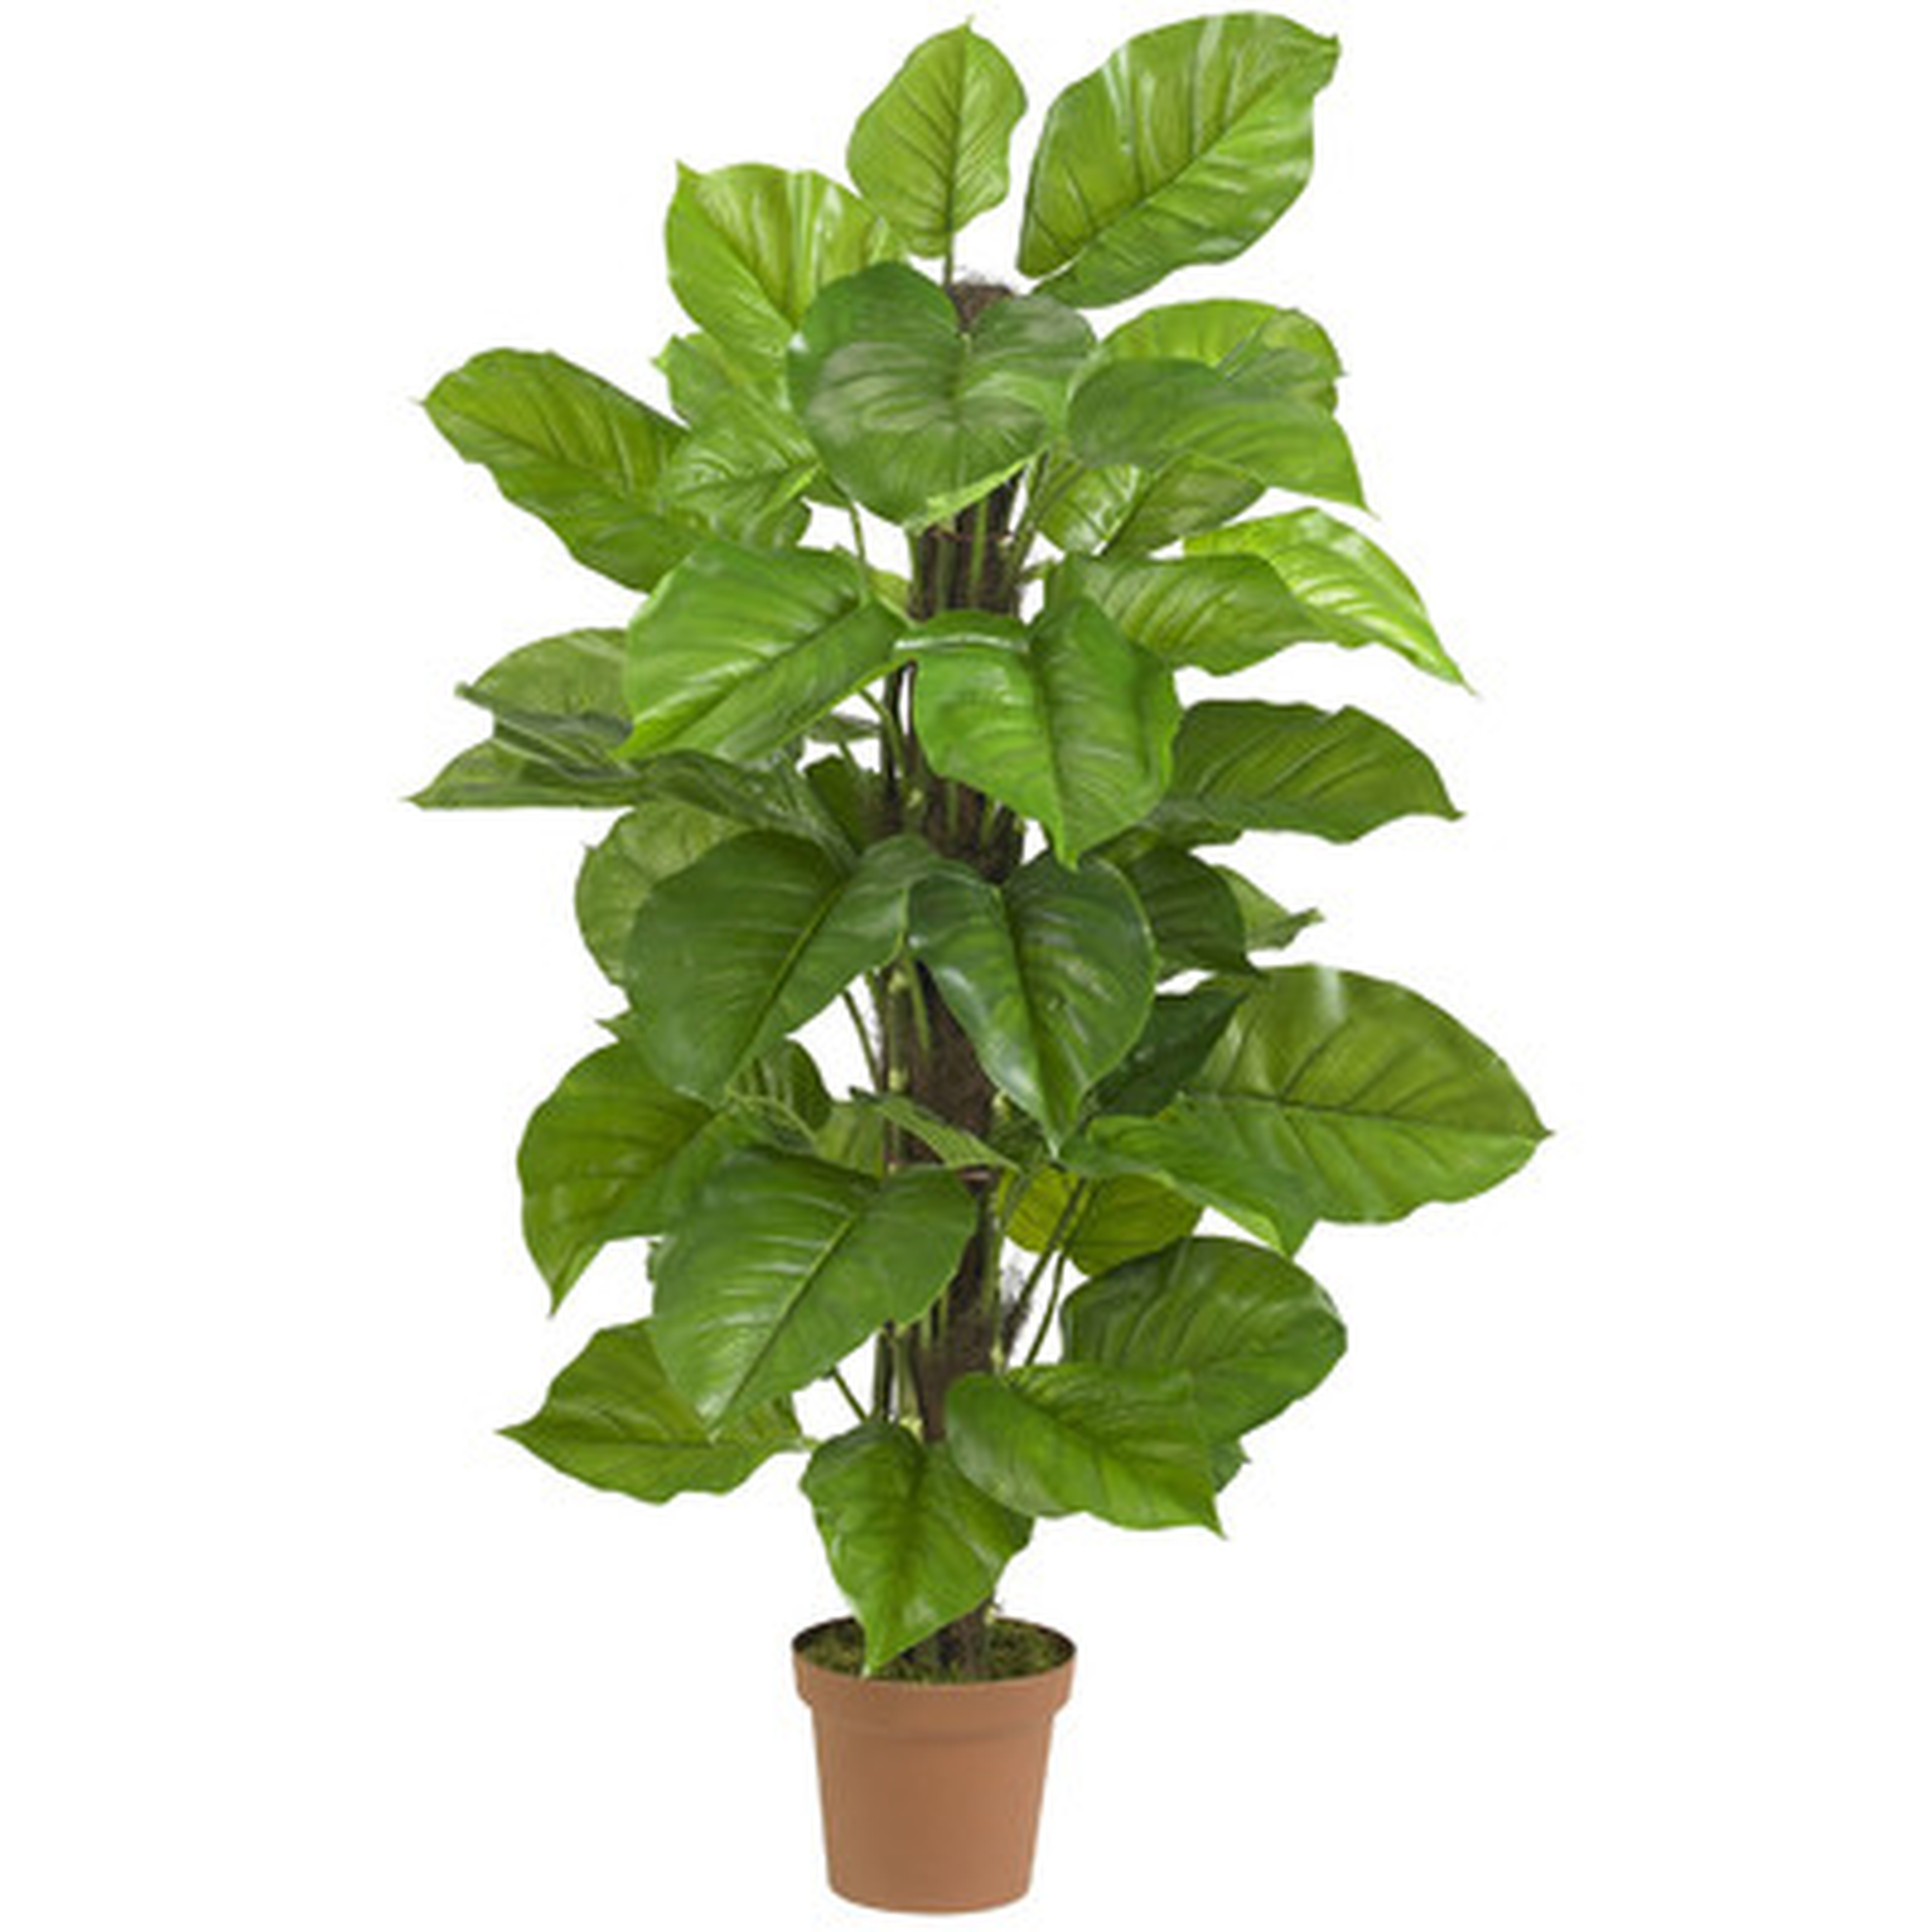 Leaf Philodendron Tree in Pot - Wayfair